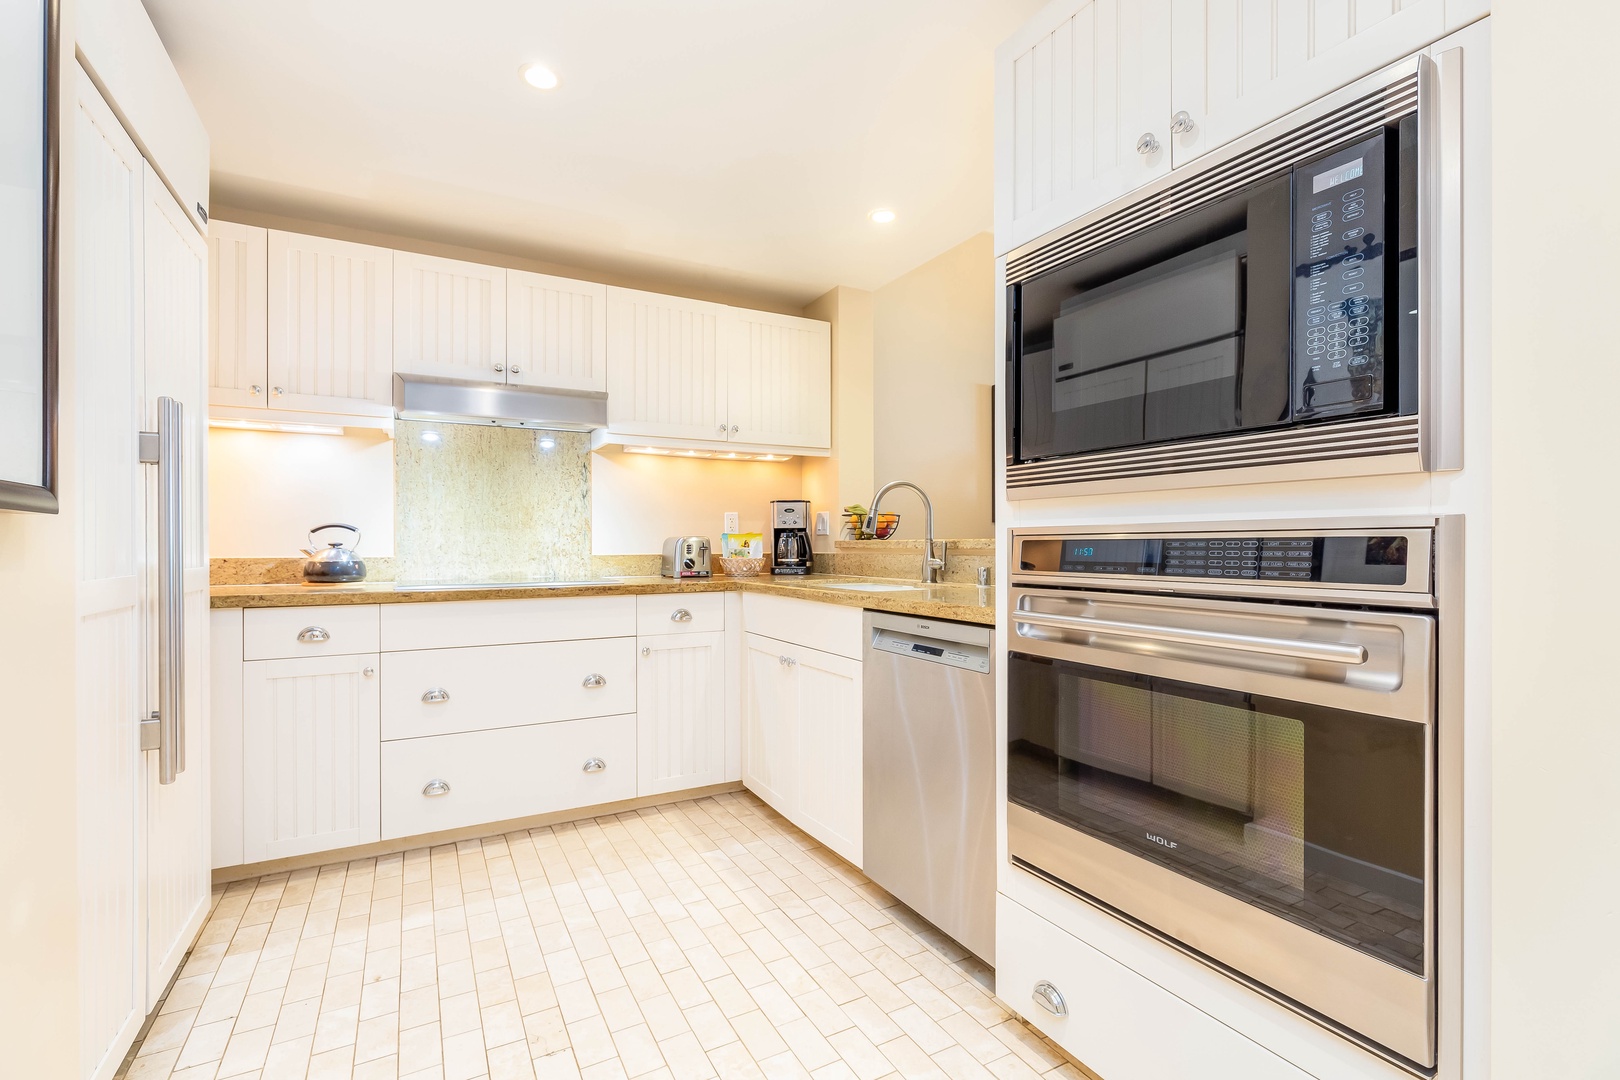 Kahuku Vacation Rentals, Turtle Bay Villas 311 - well-appointed kitchen, perfect for crafting your favorite meals